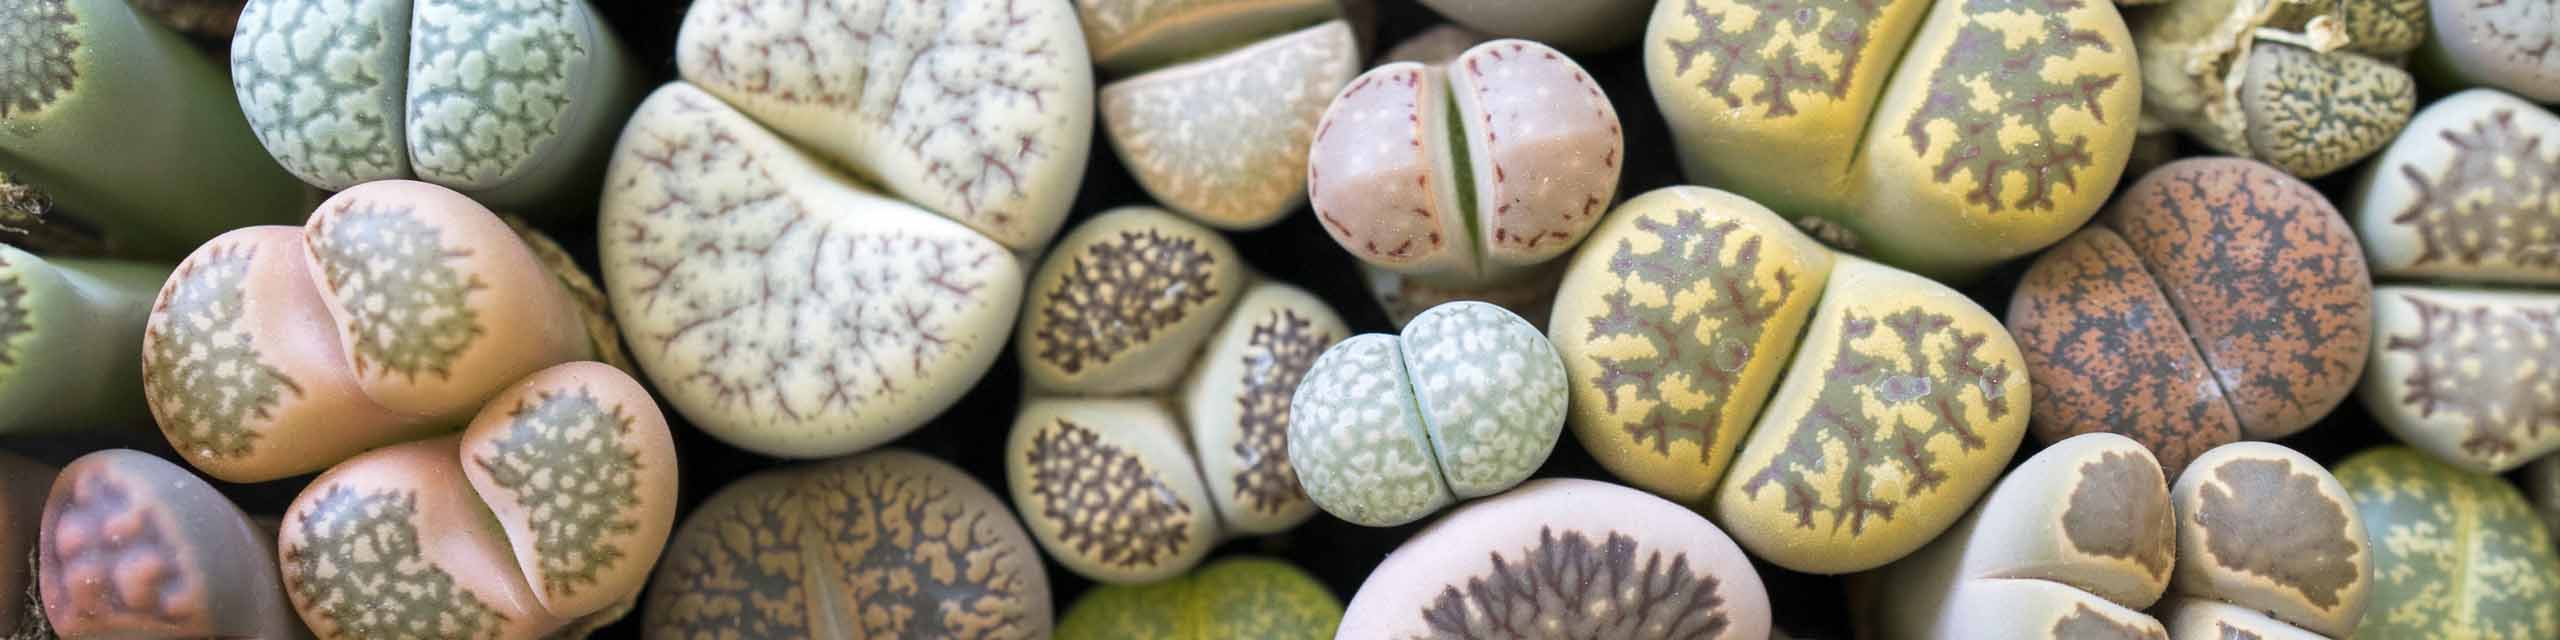 Top down view of various types of lithops or stone plants.